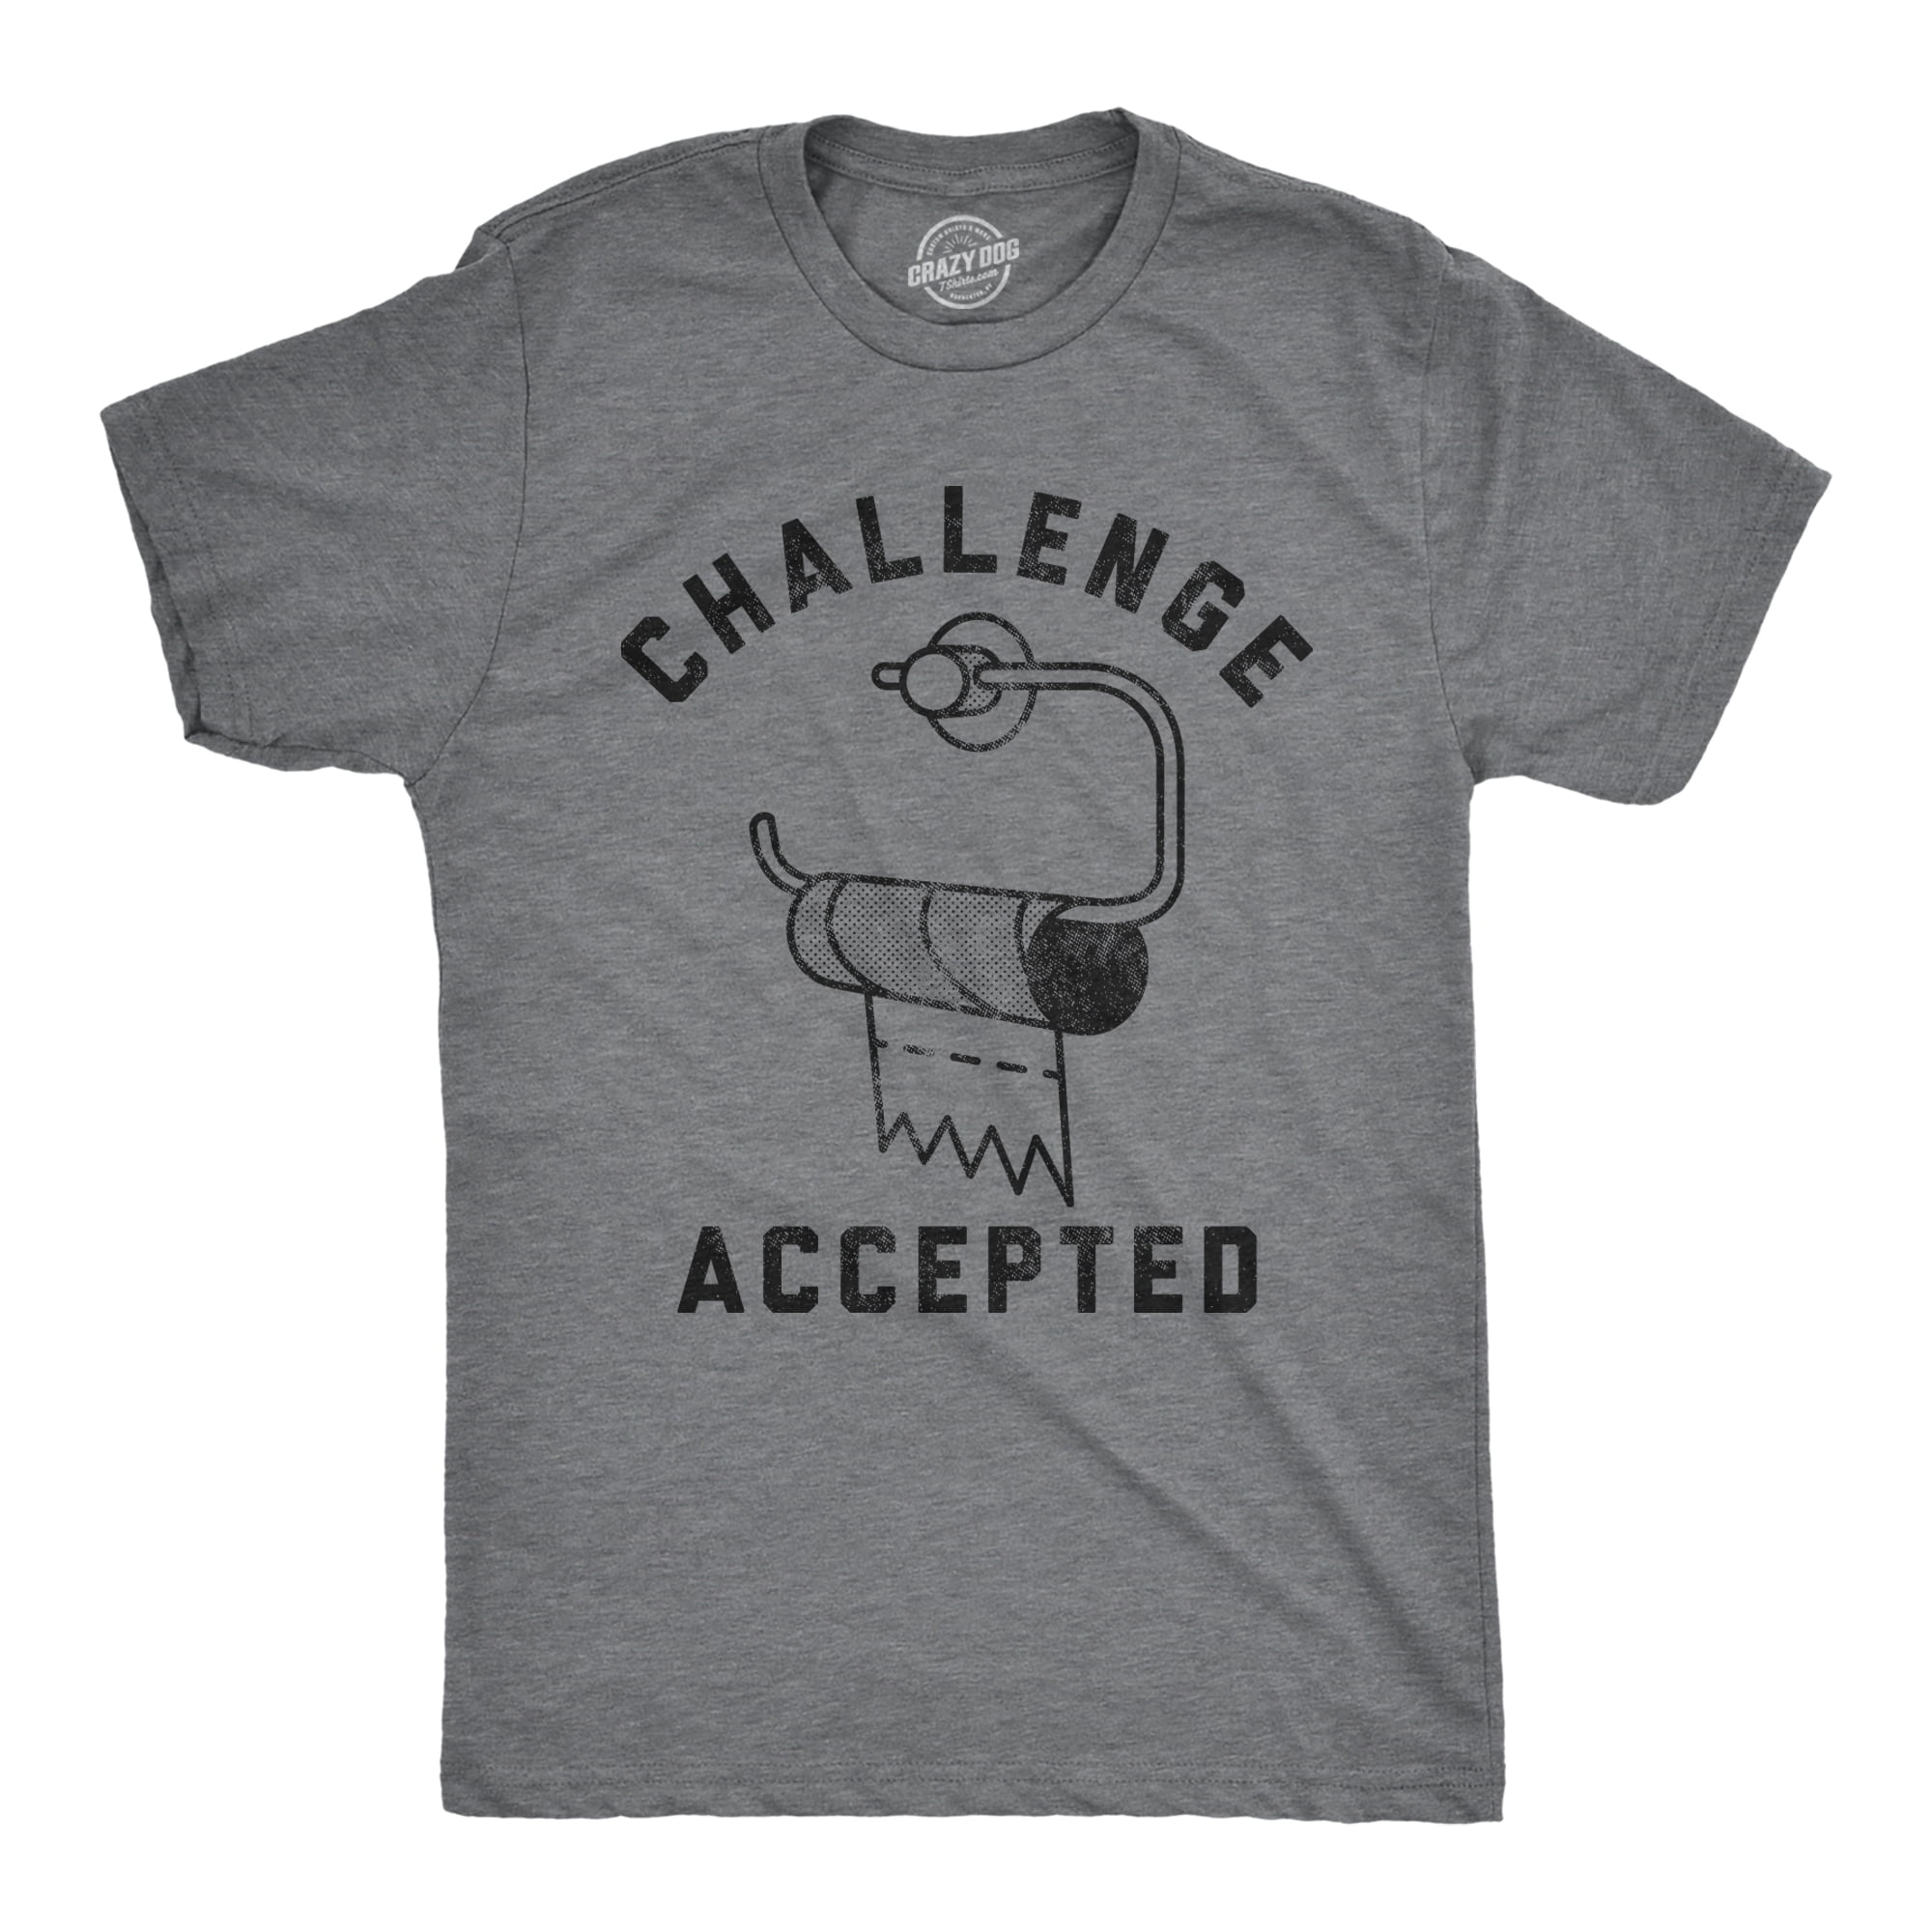 Mens Challenge Accepted Tshirt Funny Toilet Paper Roll Graphic